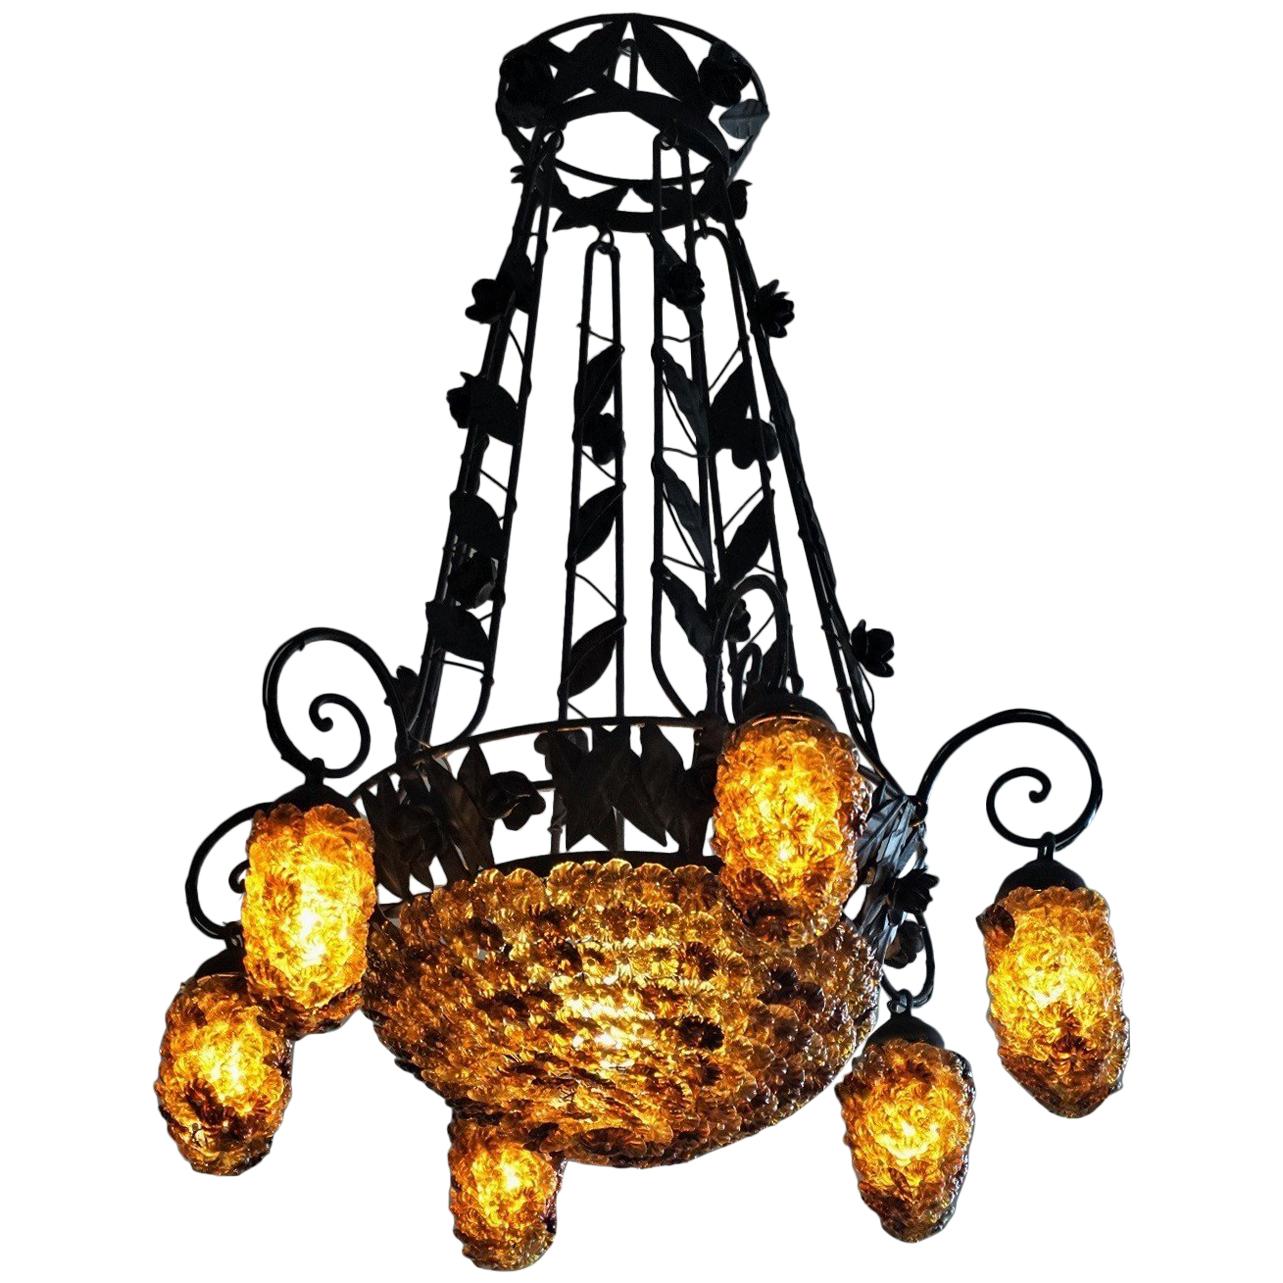 Italian six arm Murano glass chandelier with painted wrought iron flowers and leaf decoration, bowl base of Murano glass flowers and six bunch of grapes shape shades of Murano Glass, all in beautiful autumn colors.
Seven-light: One E27 bulb socket